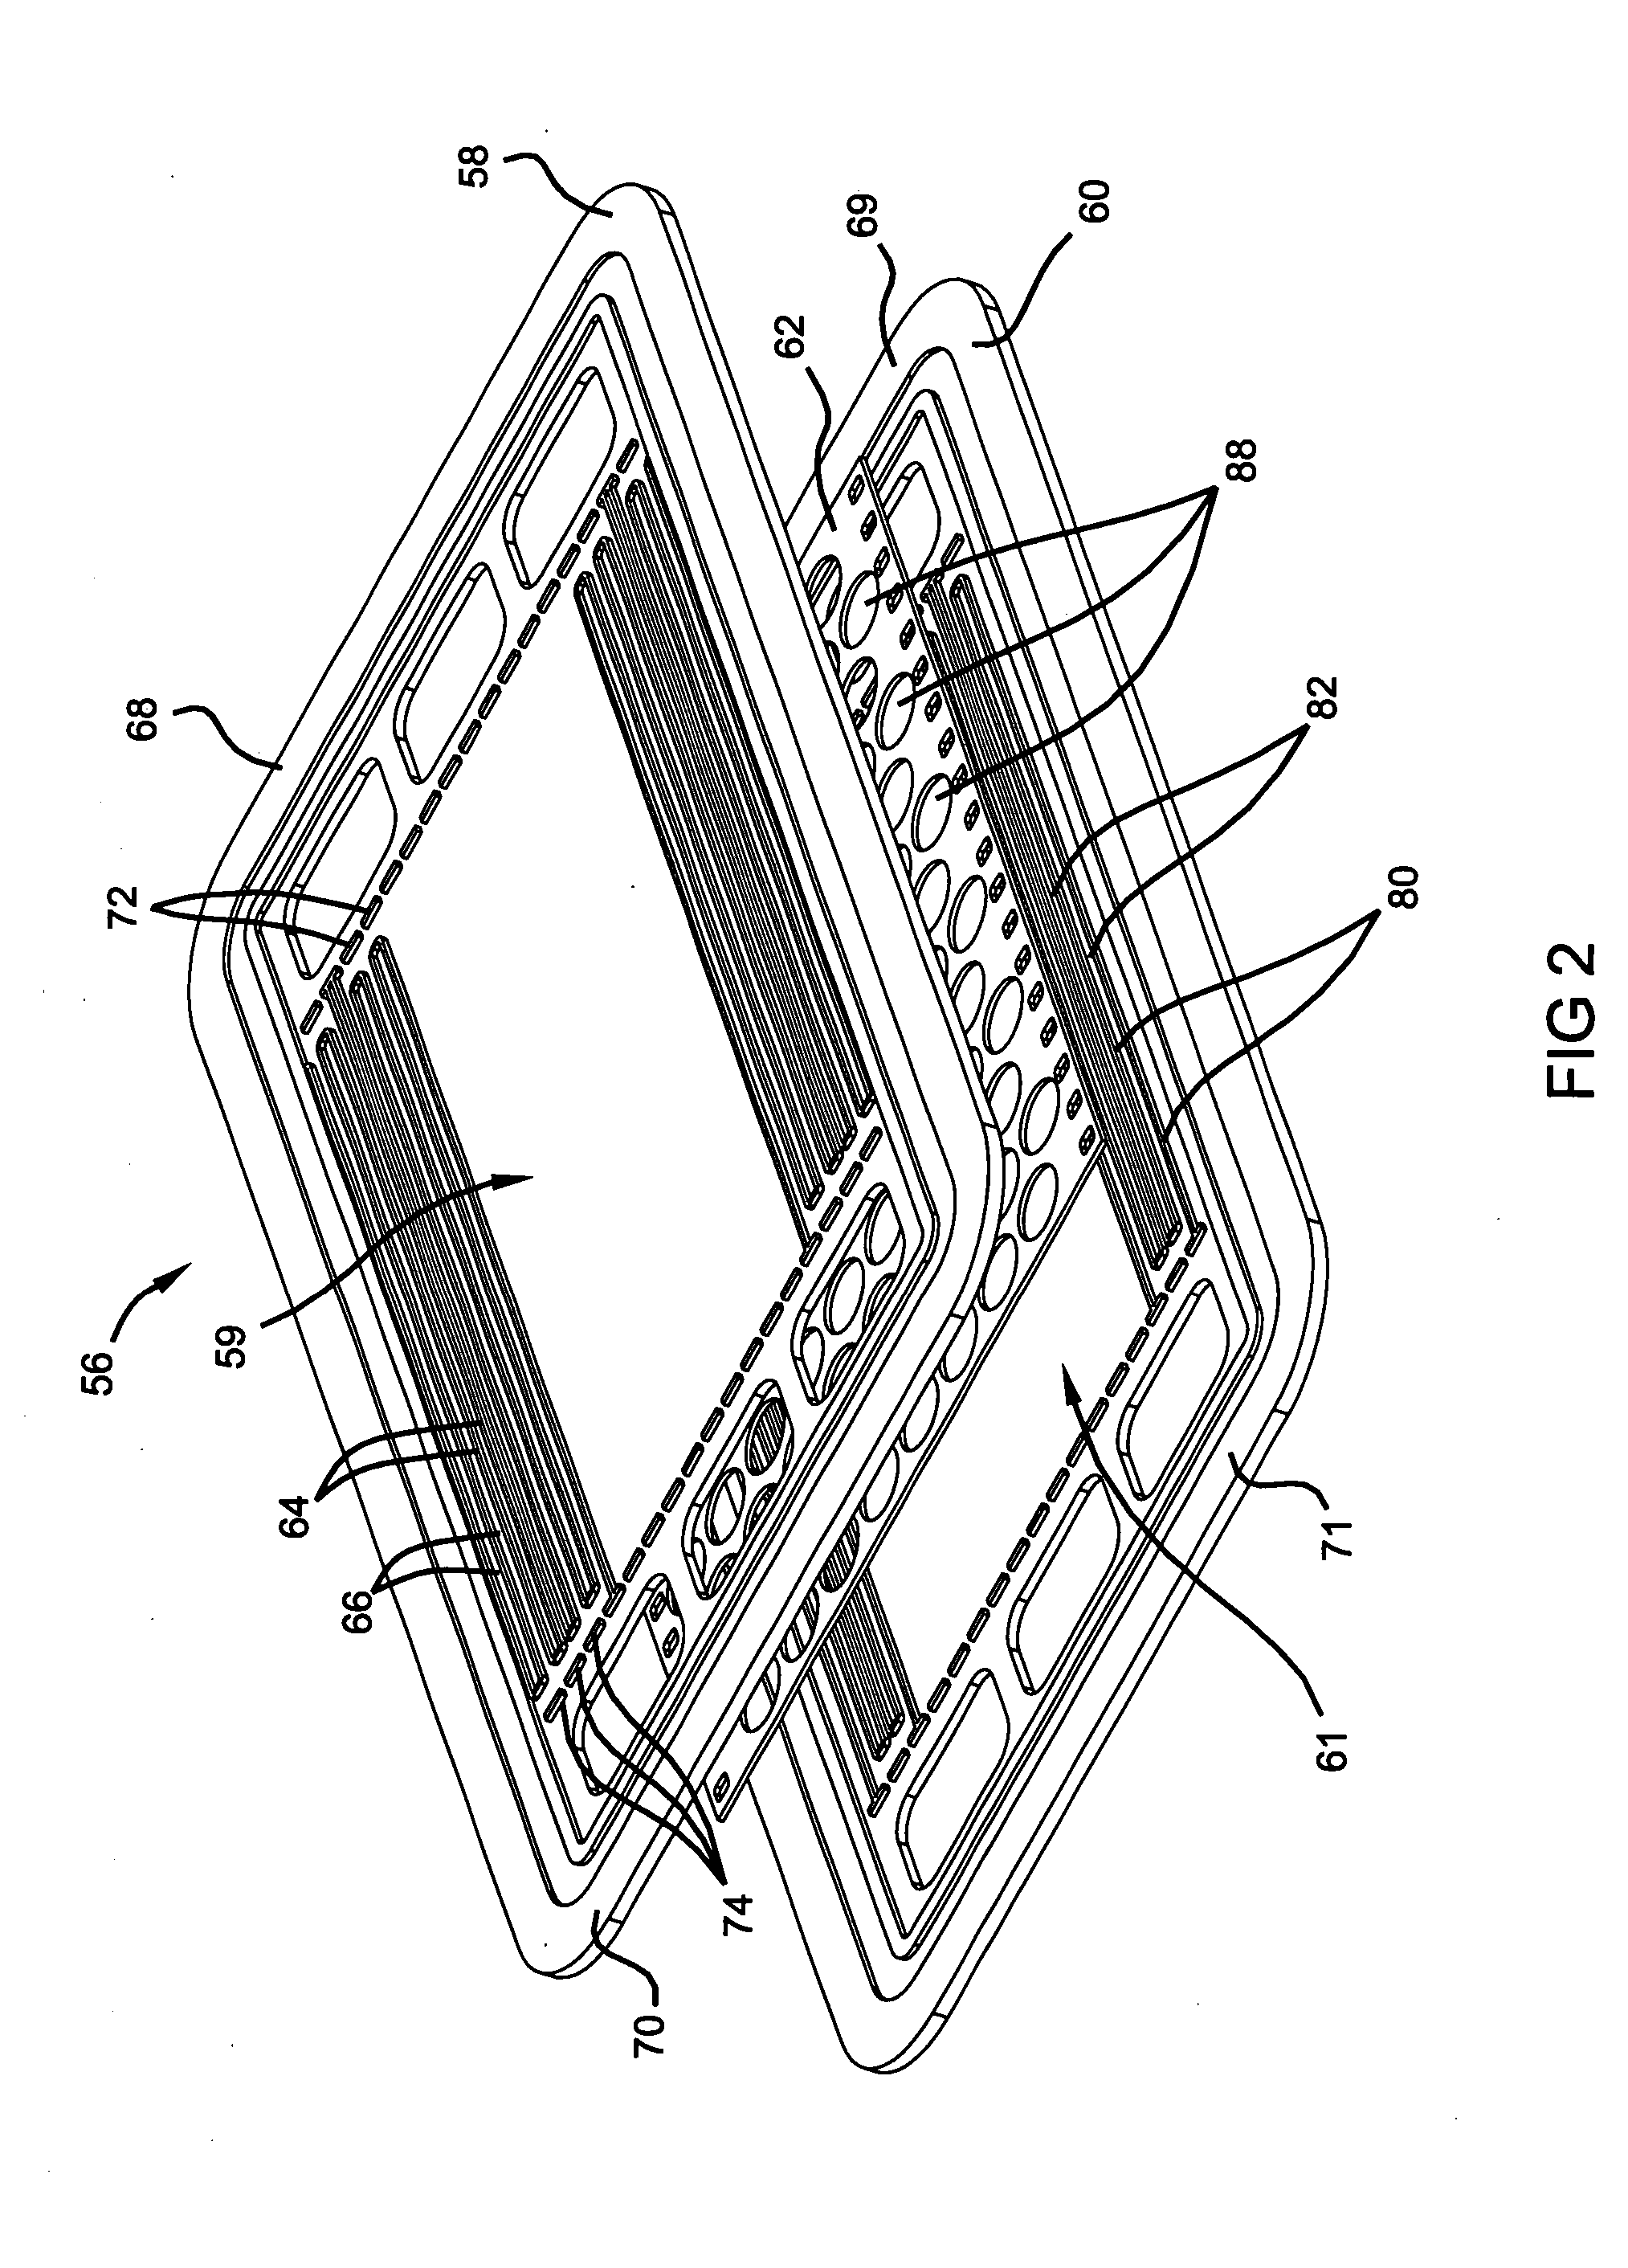 Electrically conductive element treated for use in a fuel cell